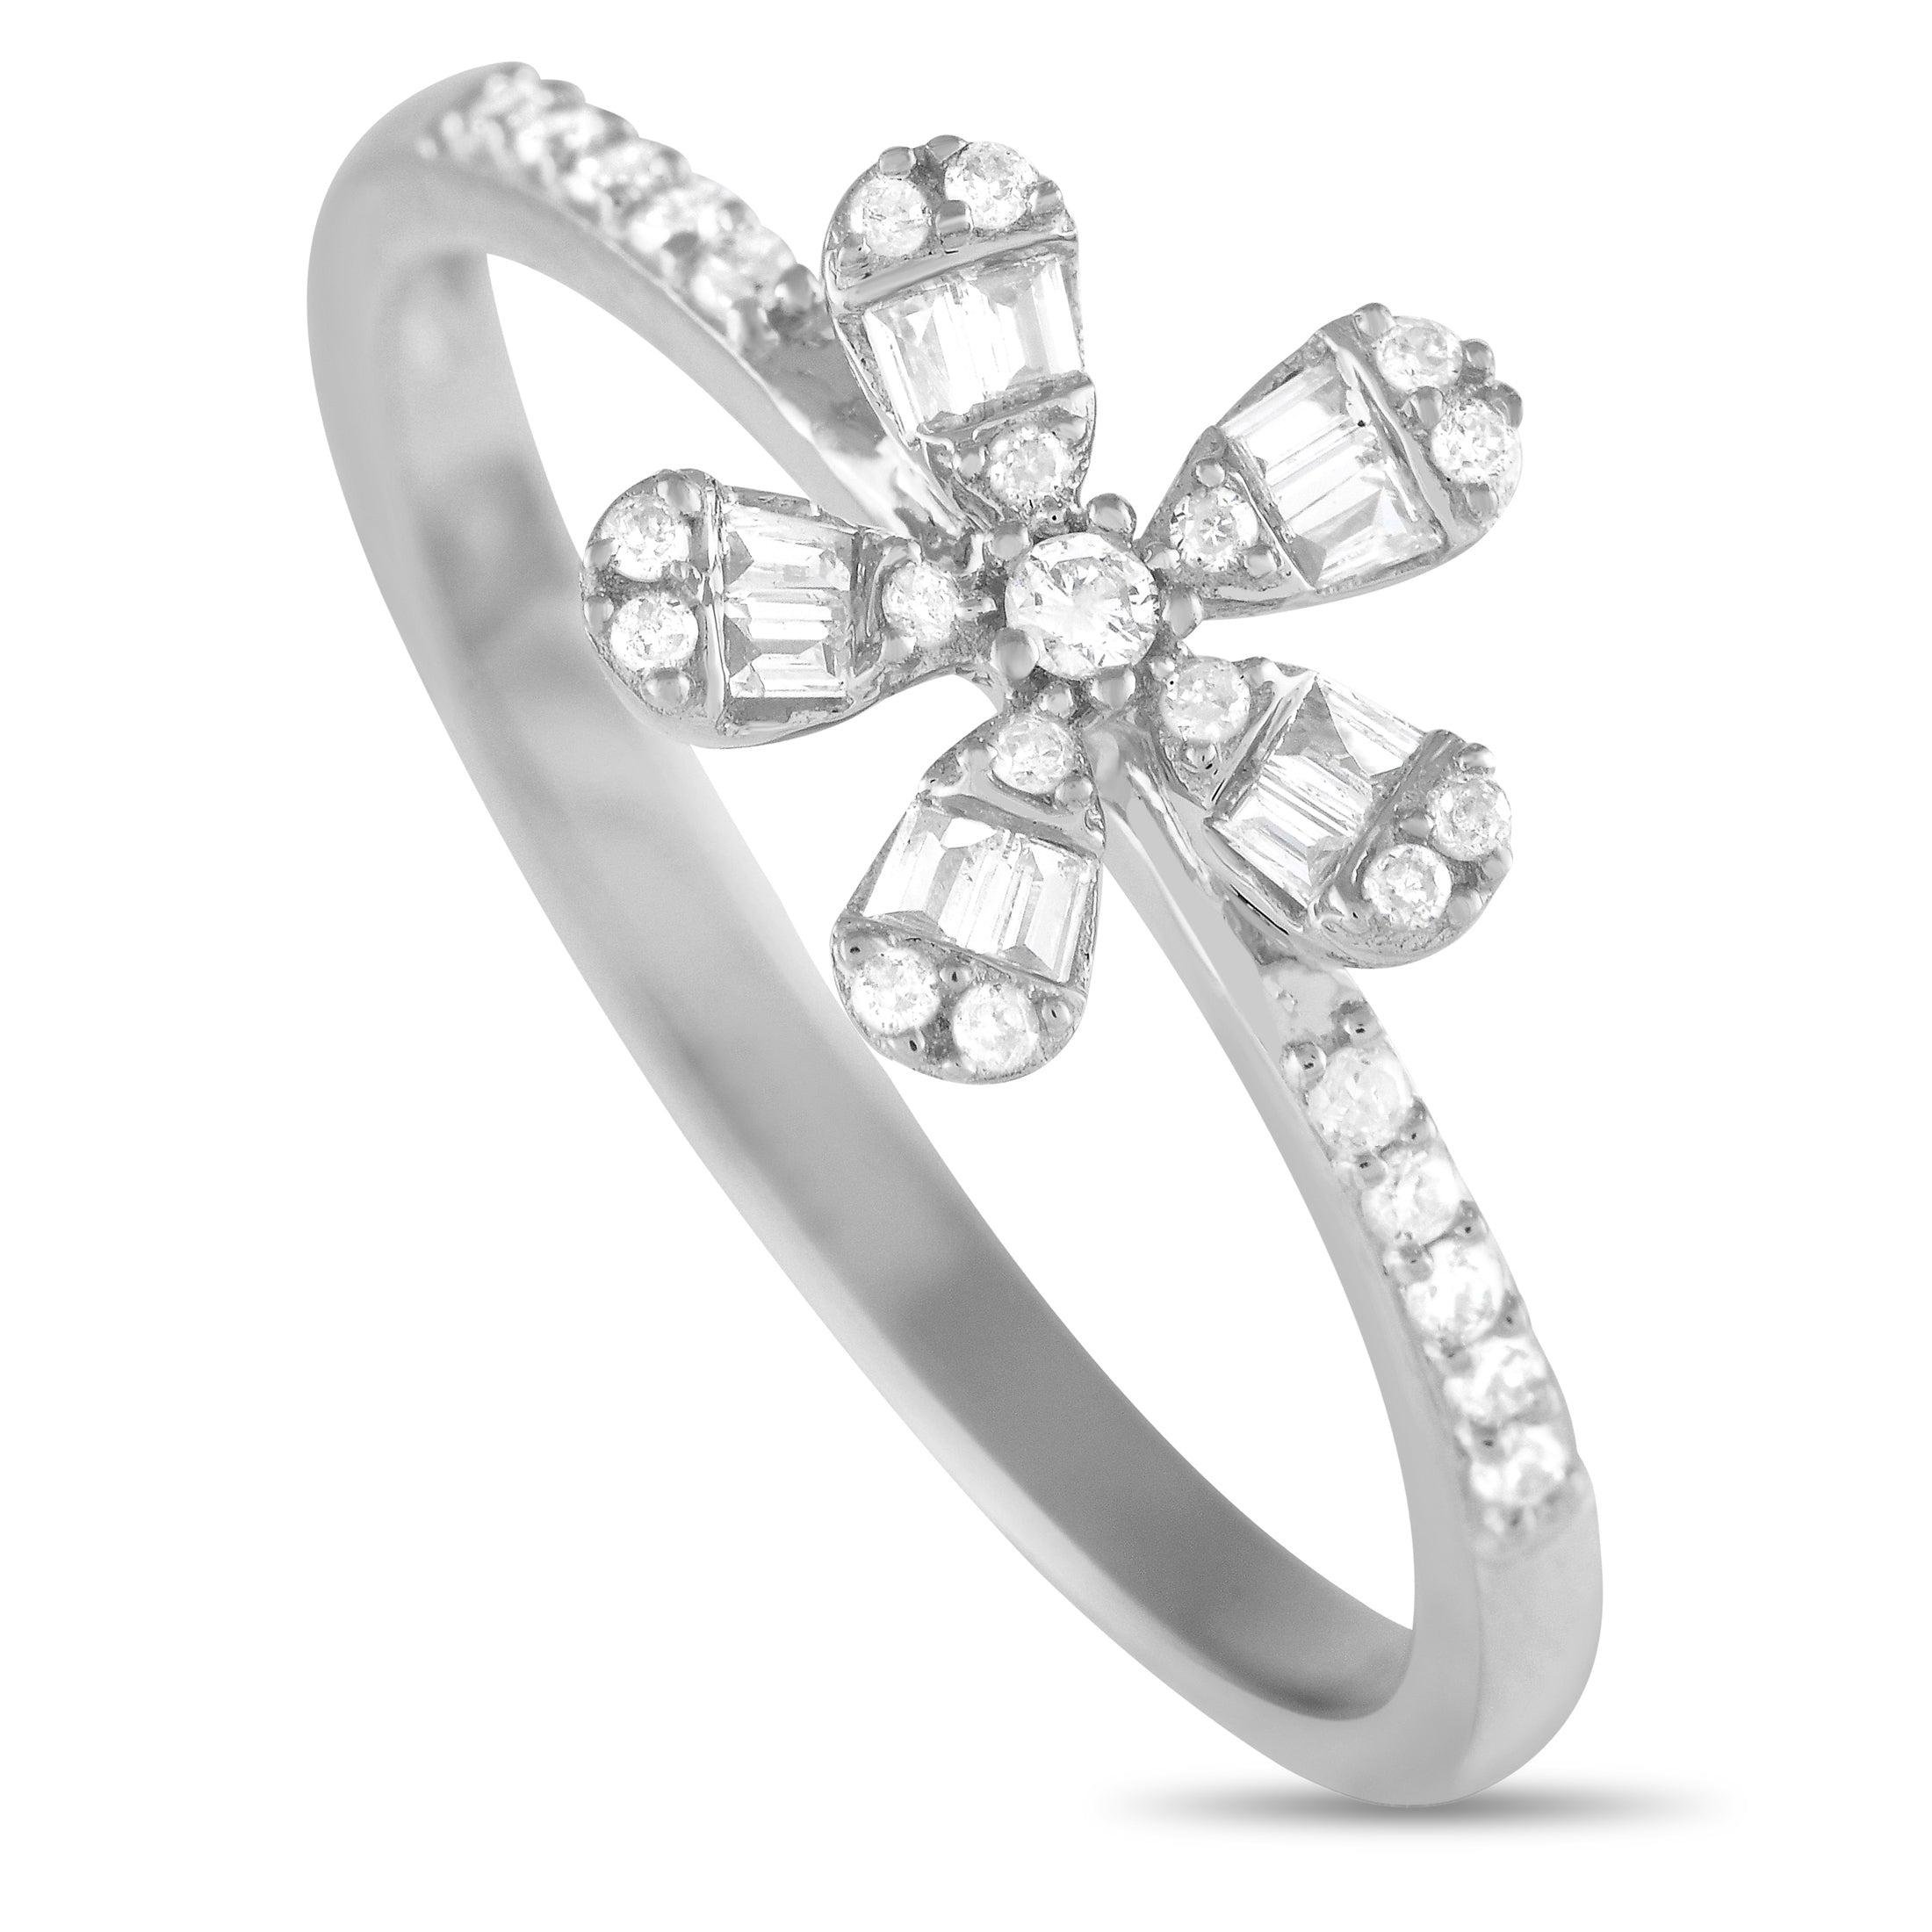 LB Exclusive 14K White Gold 0.20ct Diamond Flower Ring RN32405-W by NON BRANDED